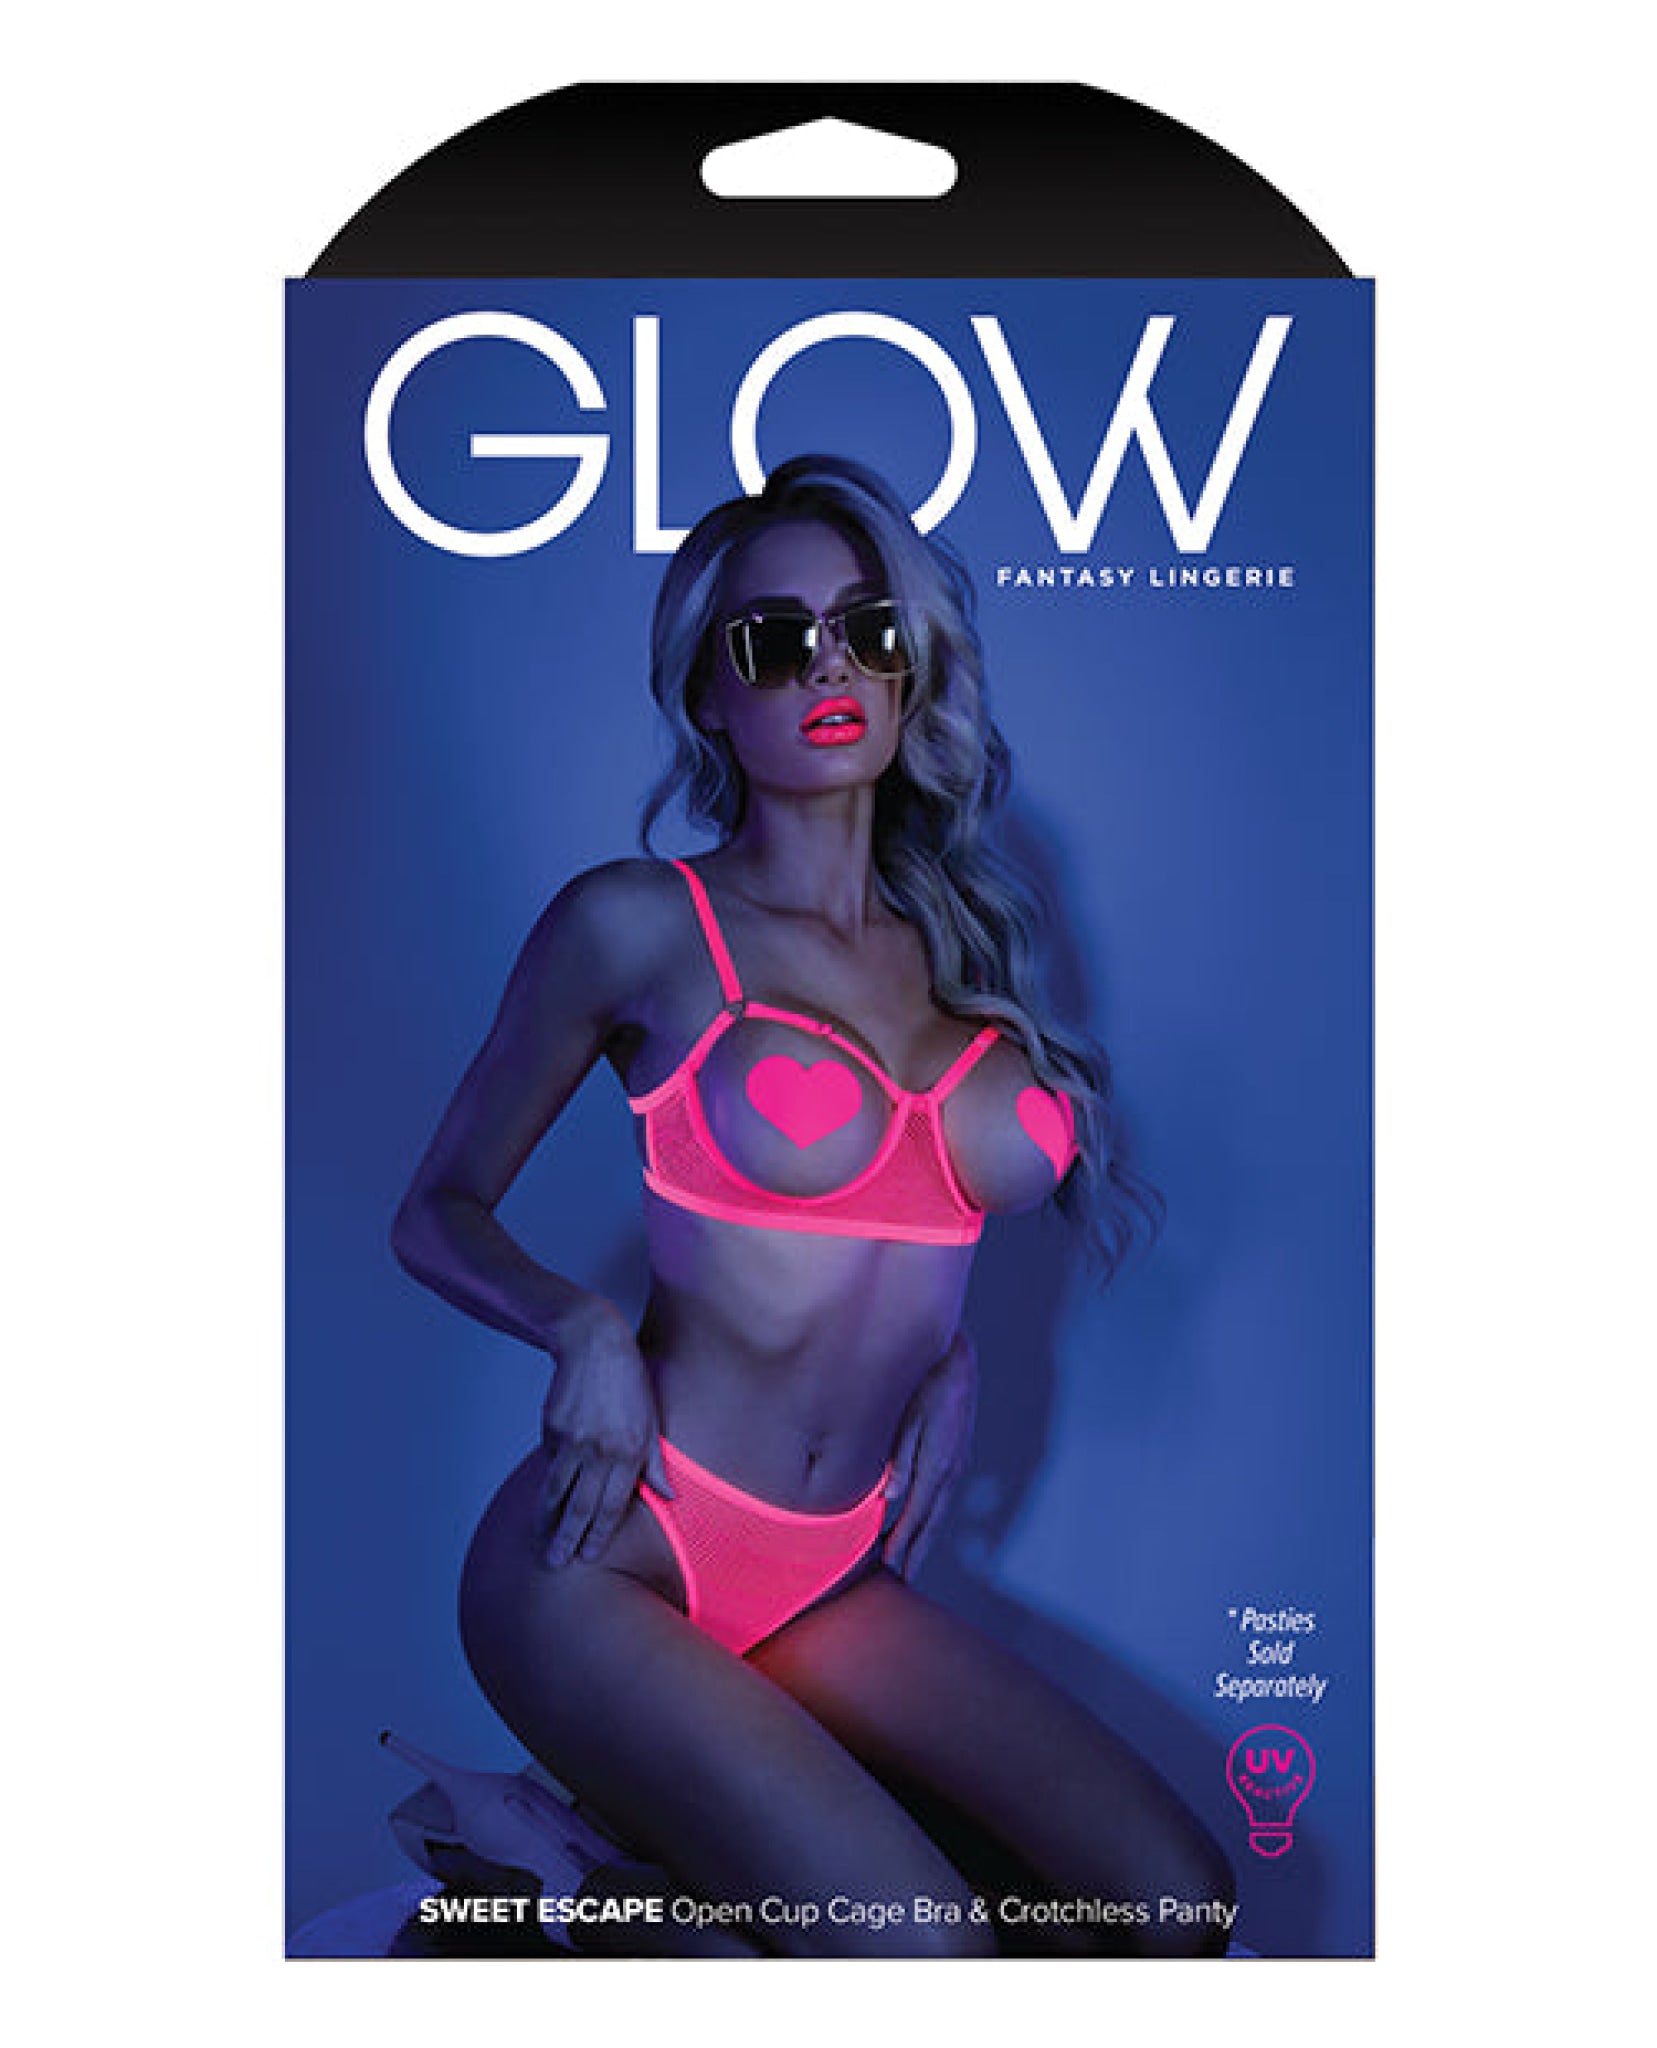 Glow Black Light Open Cup Bra & Crotchless Panties (pasties Not Included) Neon Pink Fantasy Lingerie